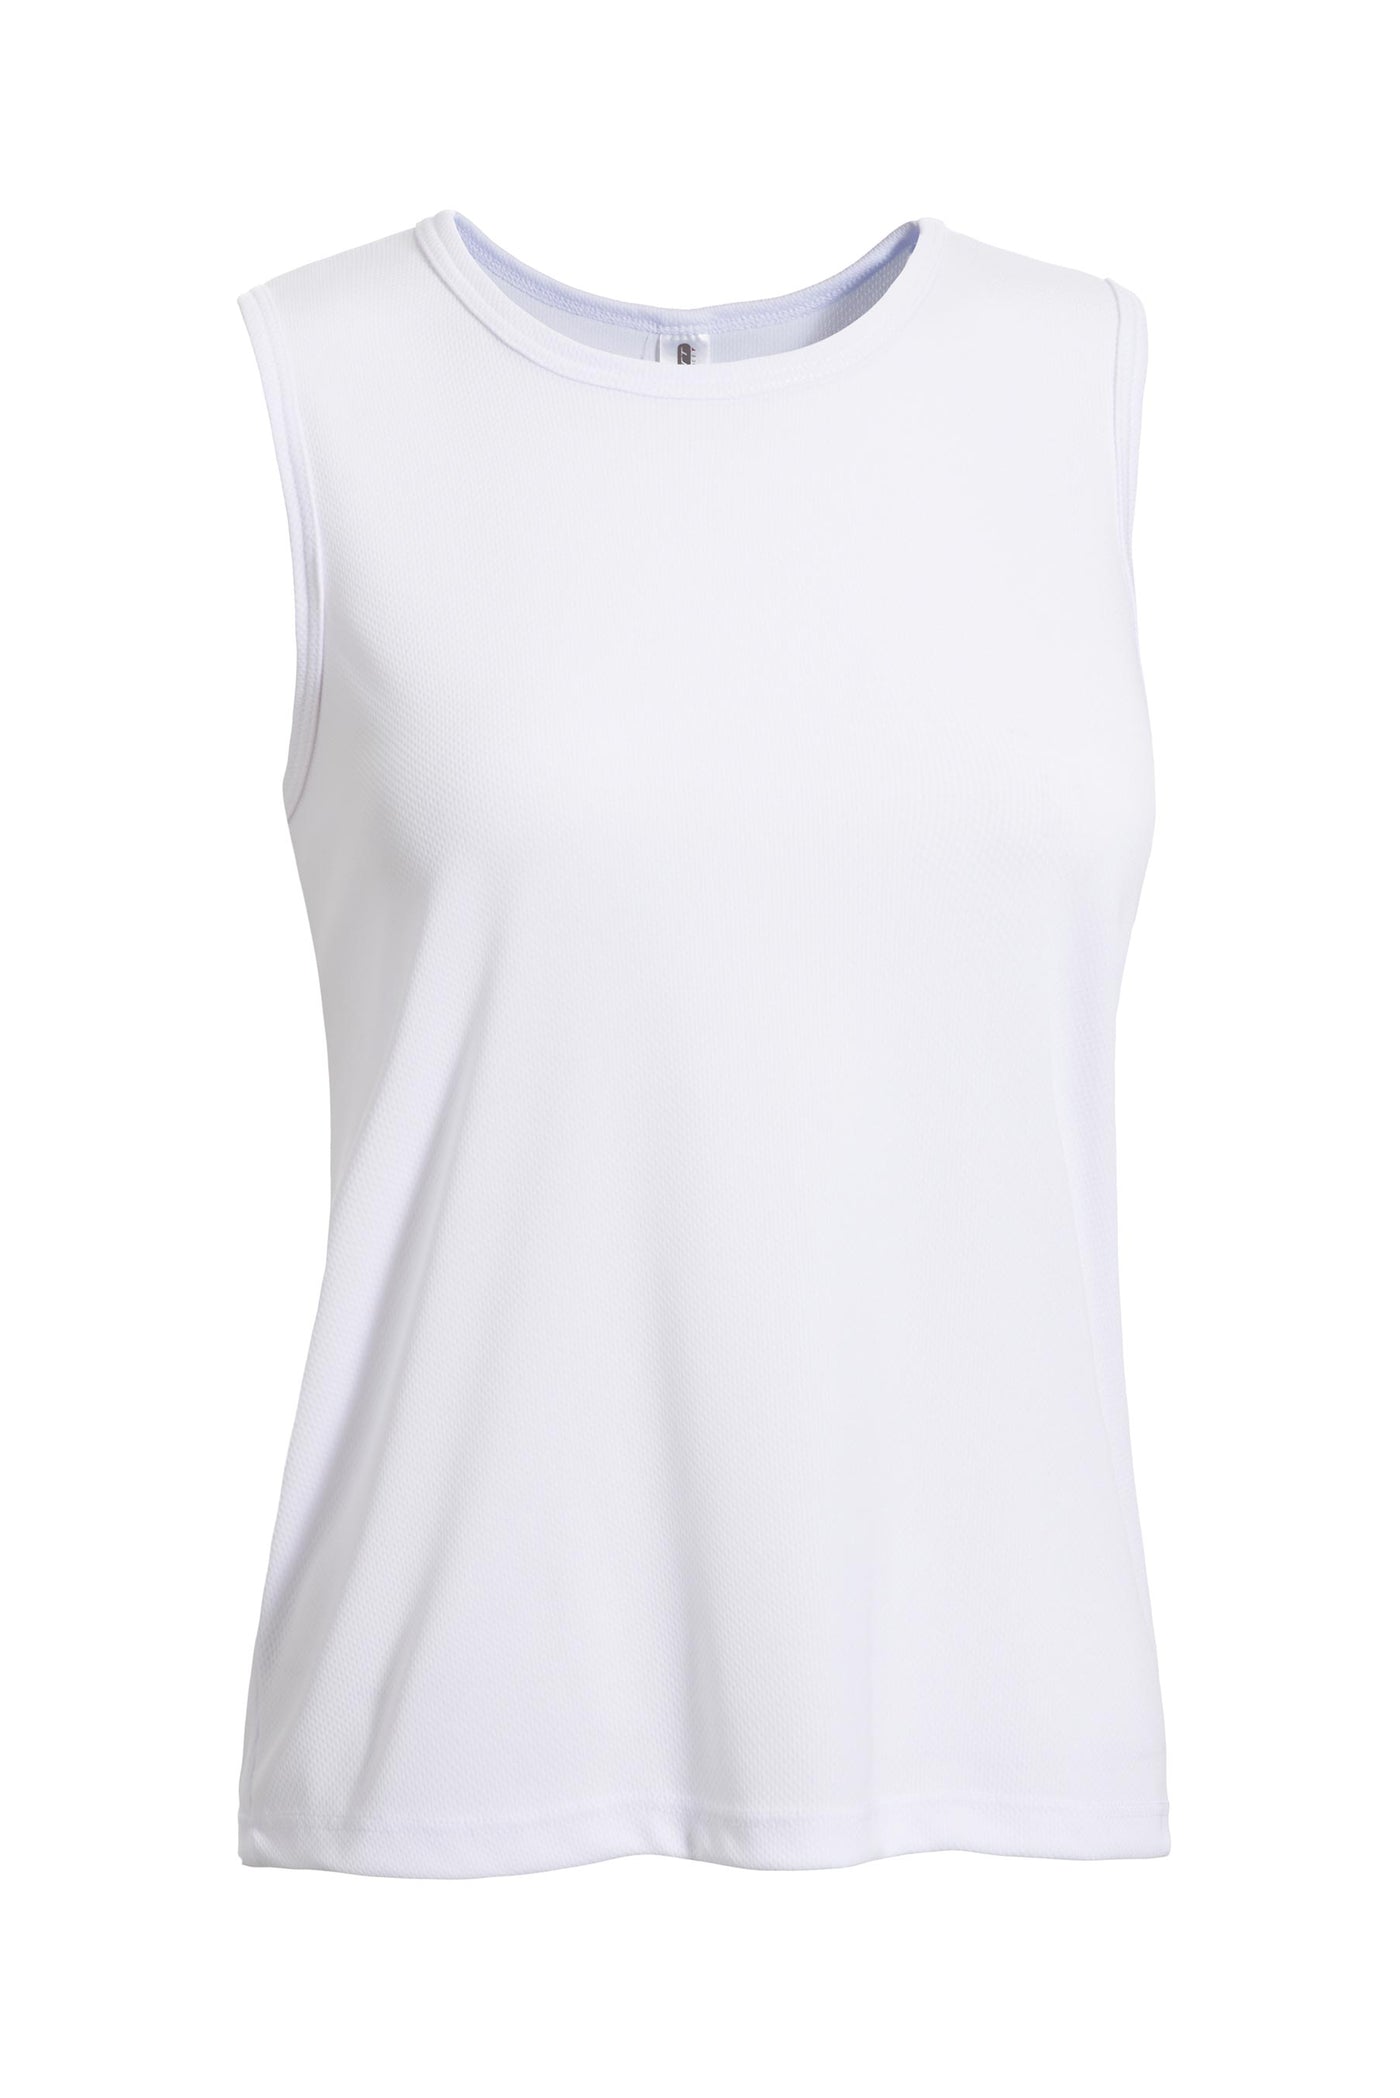 Oxymesh™ Muscle Tank 🇺🇸 - Expert Brand Apparel#color_white